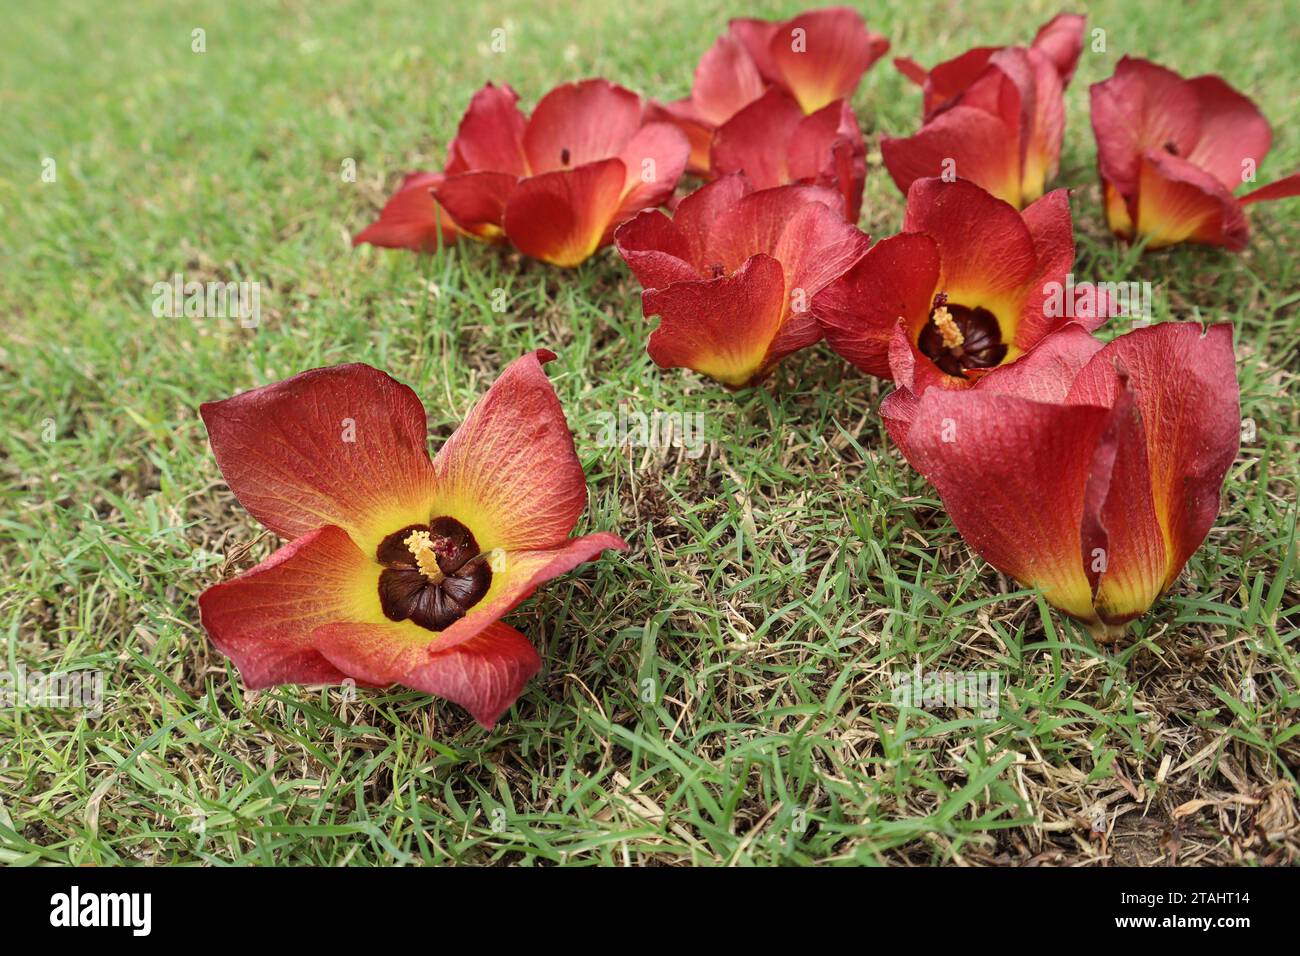 Beautiful Sea HIbiscus also known as hibiscus tiliaceus on green grass. Bright red shaded with yellow and orange petals coastal hibiscus Stock Photo